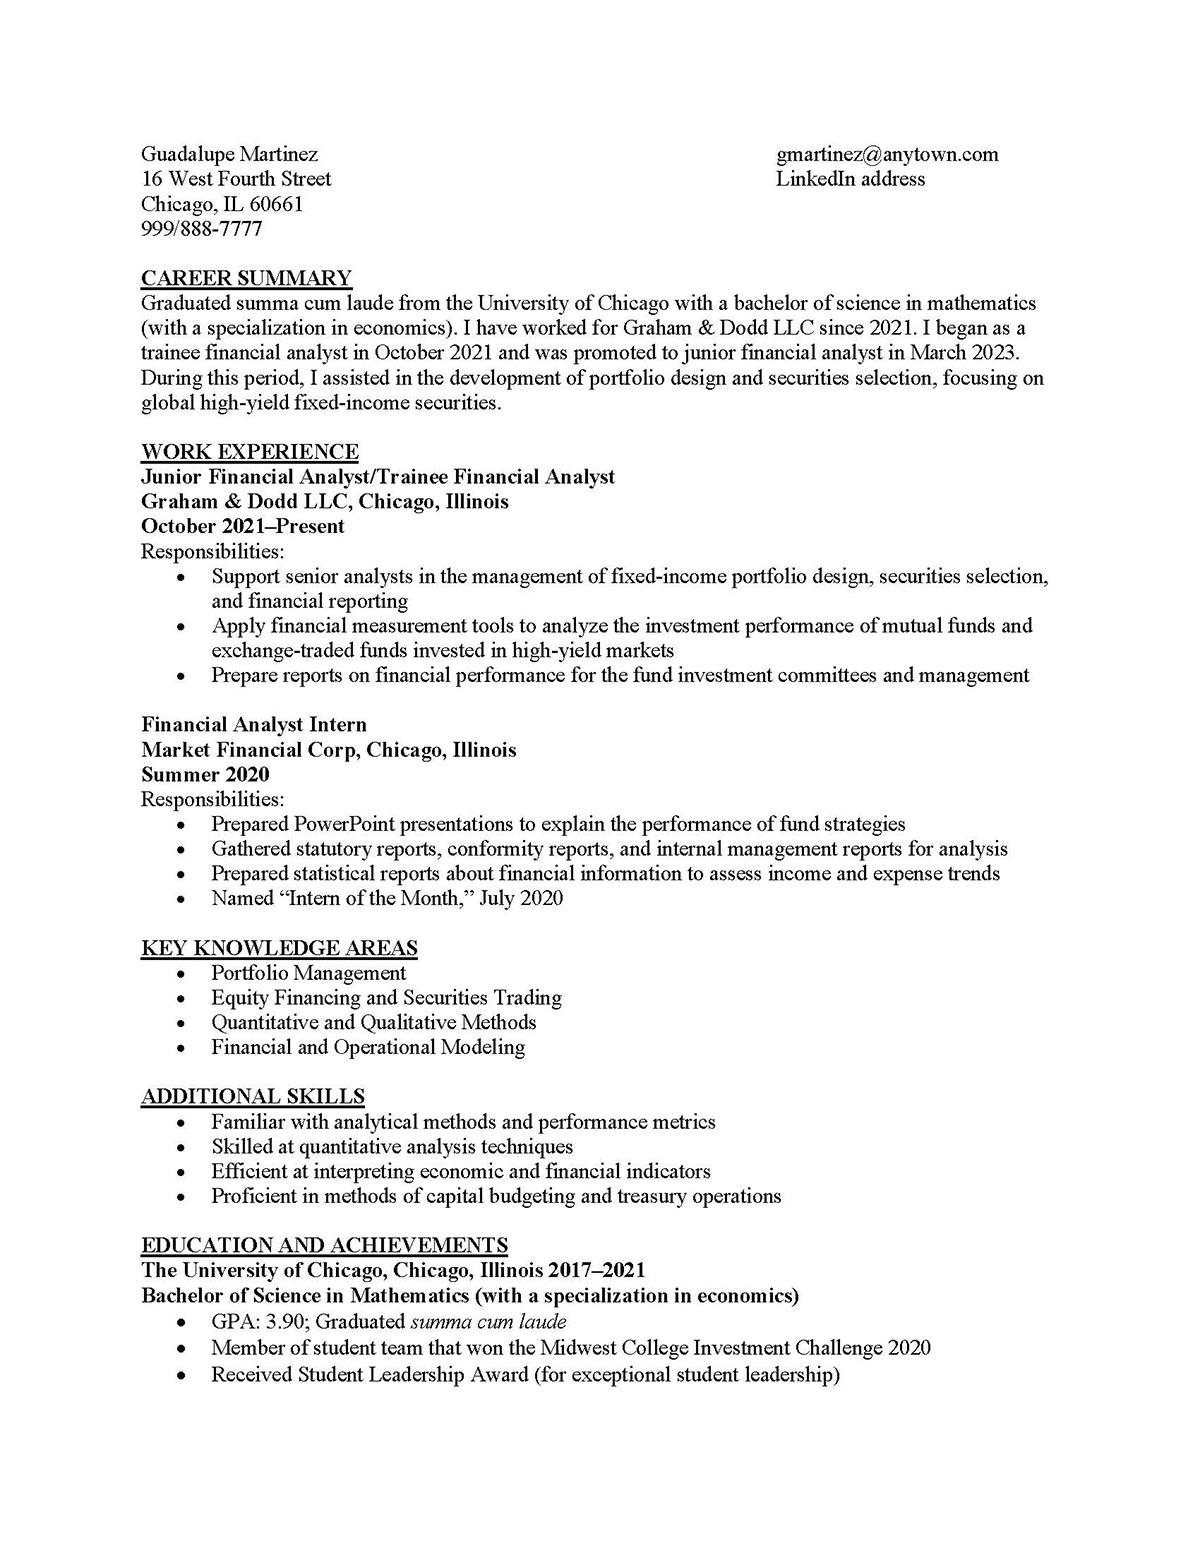 Sample resume: Finance, Low Experience, Chronological